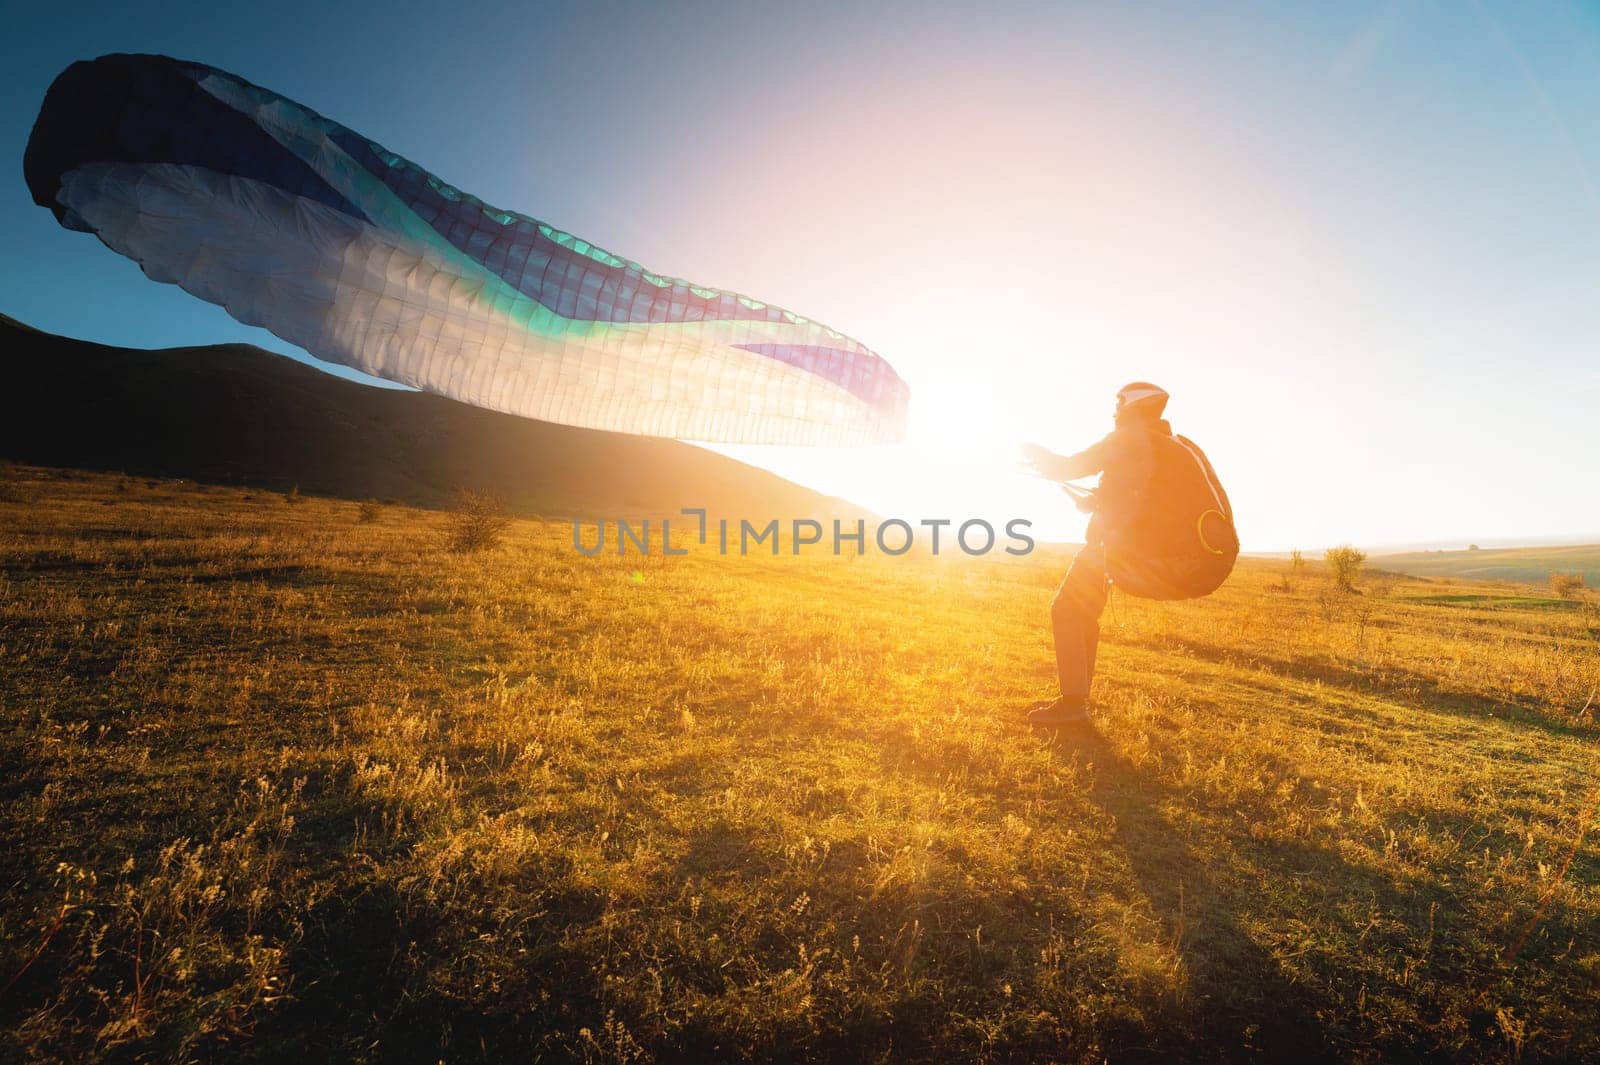 paraglider with a blue parachute takes off. A male athlete stands on the field and lifts a paraglider into the air by yanik88